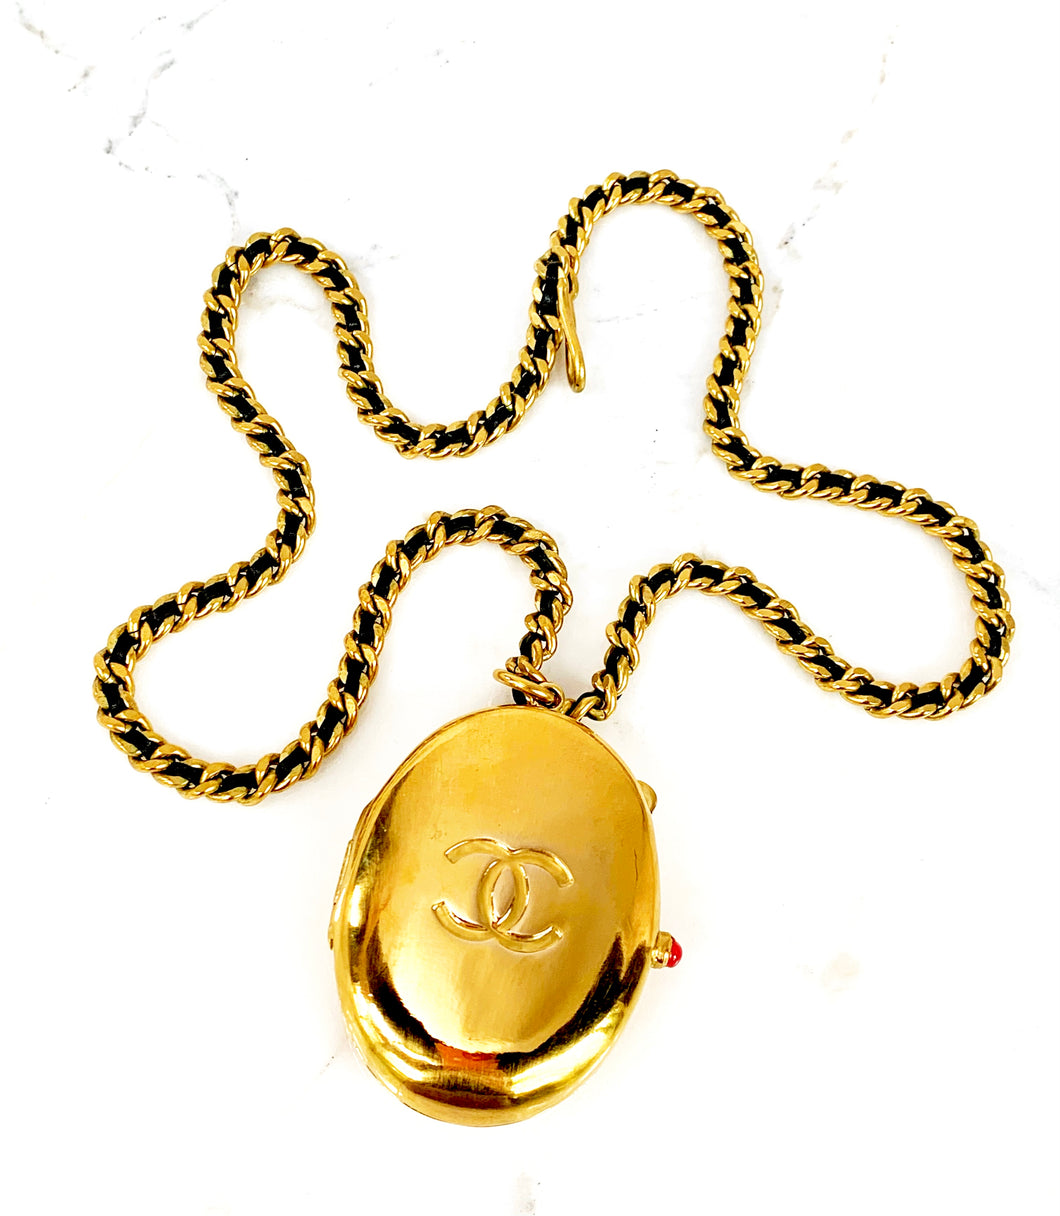 CHANEL RARE JUMBO LOCKET WITH LEATHER GILT CHAIN NECKLACE 1994